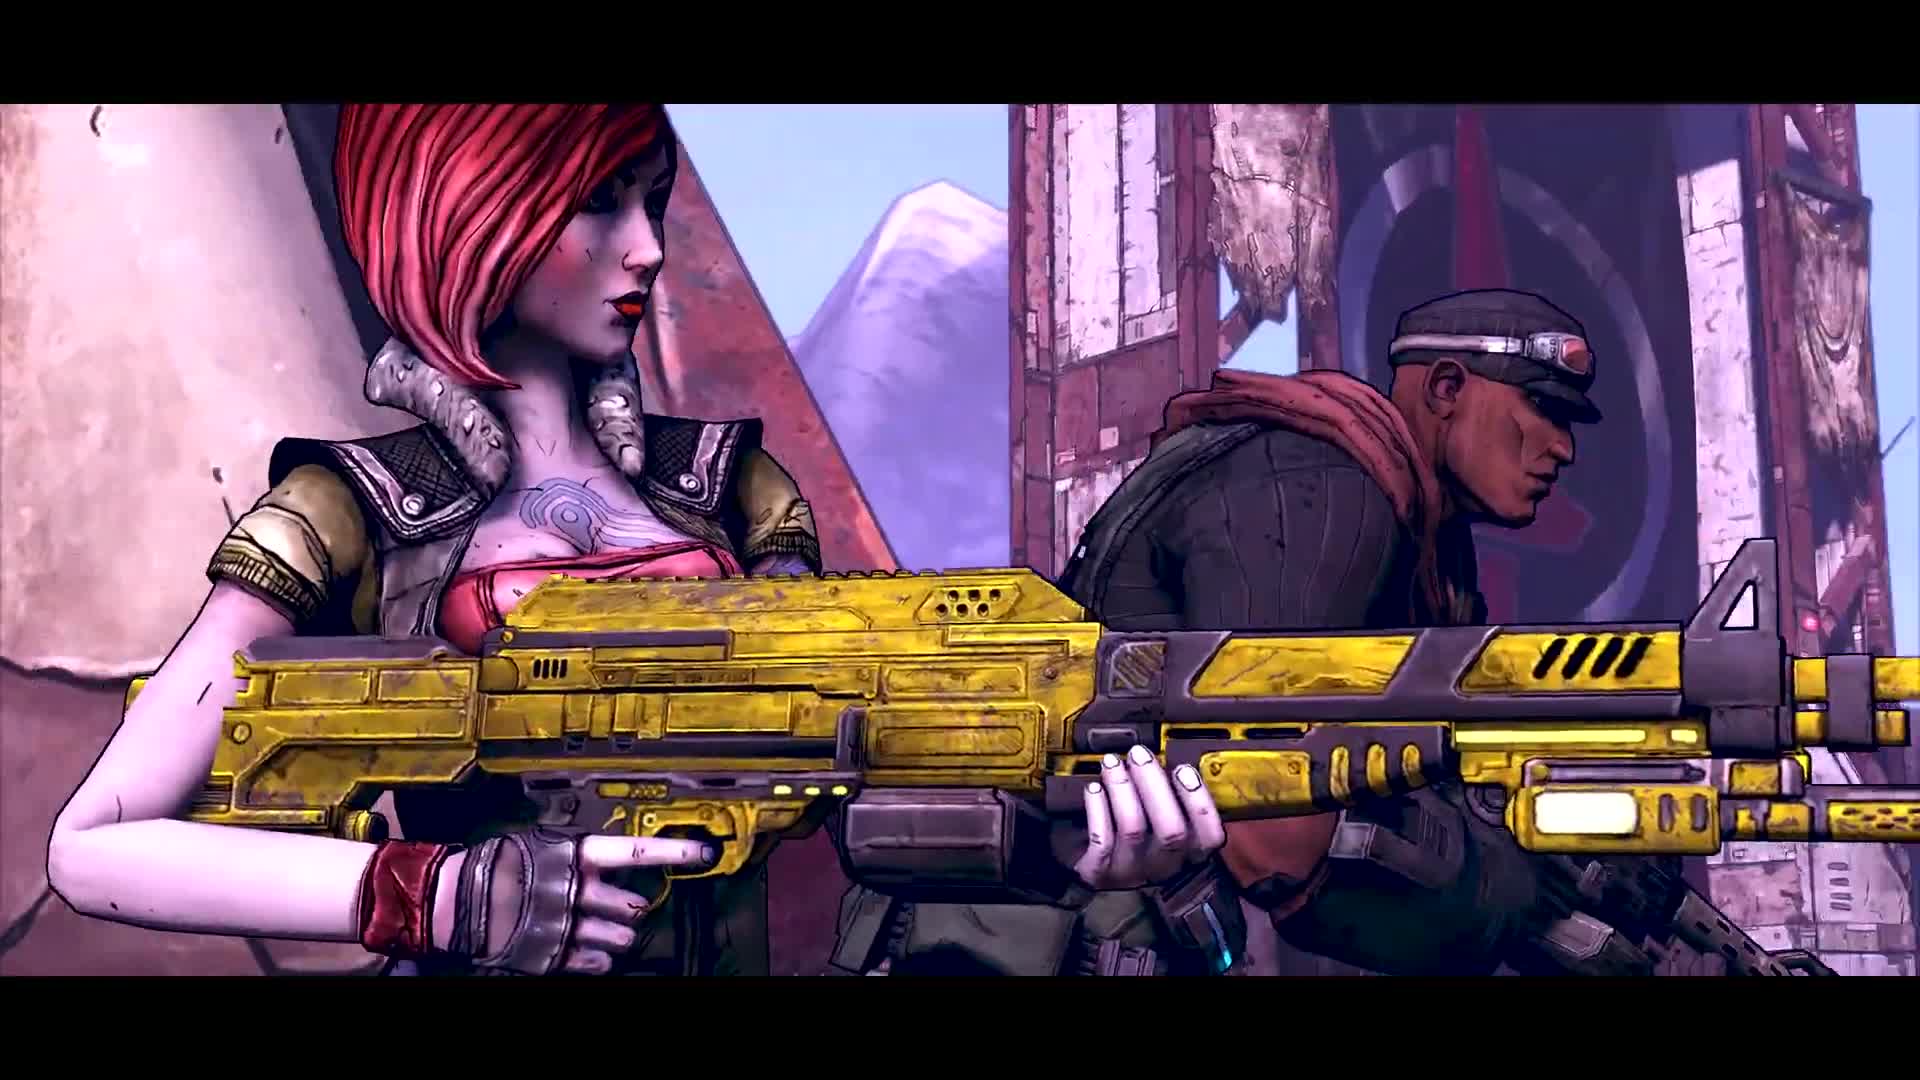 Borderlands: Game of the Year edcia ohlsen